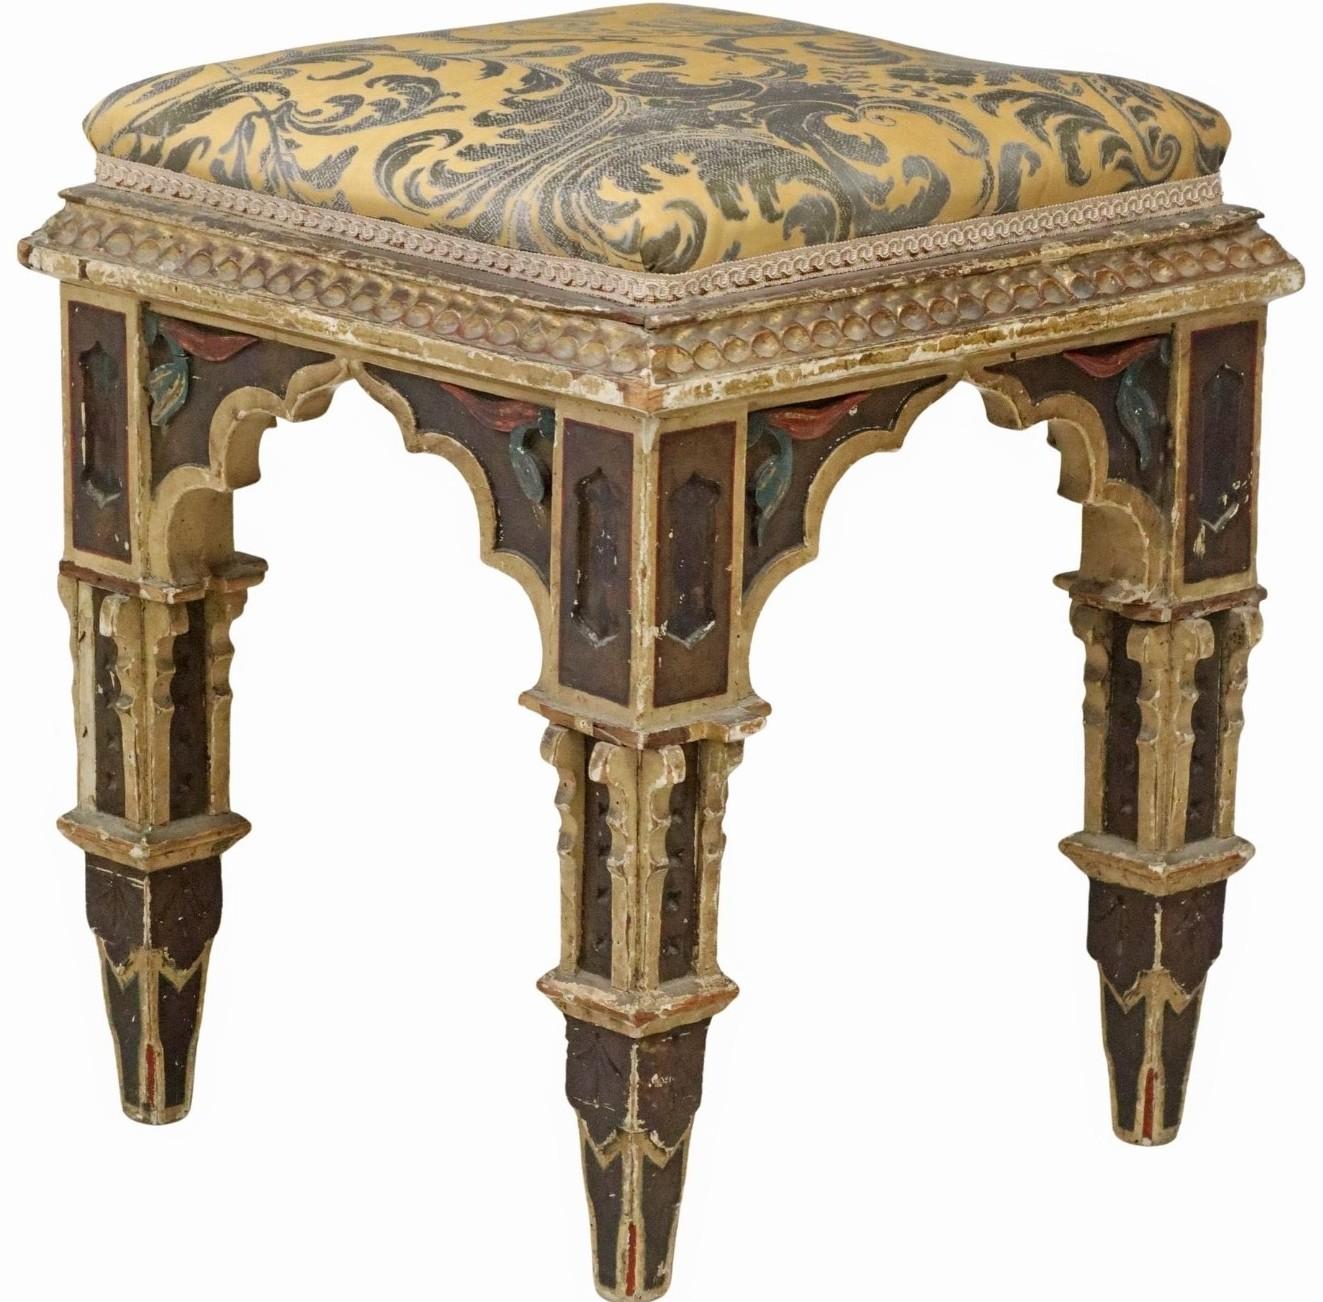 Italian Antique Gothic Revival Carved Polychrome Painted & Upholstered Stool Ottoman For Sale